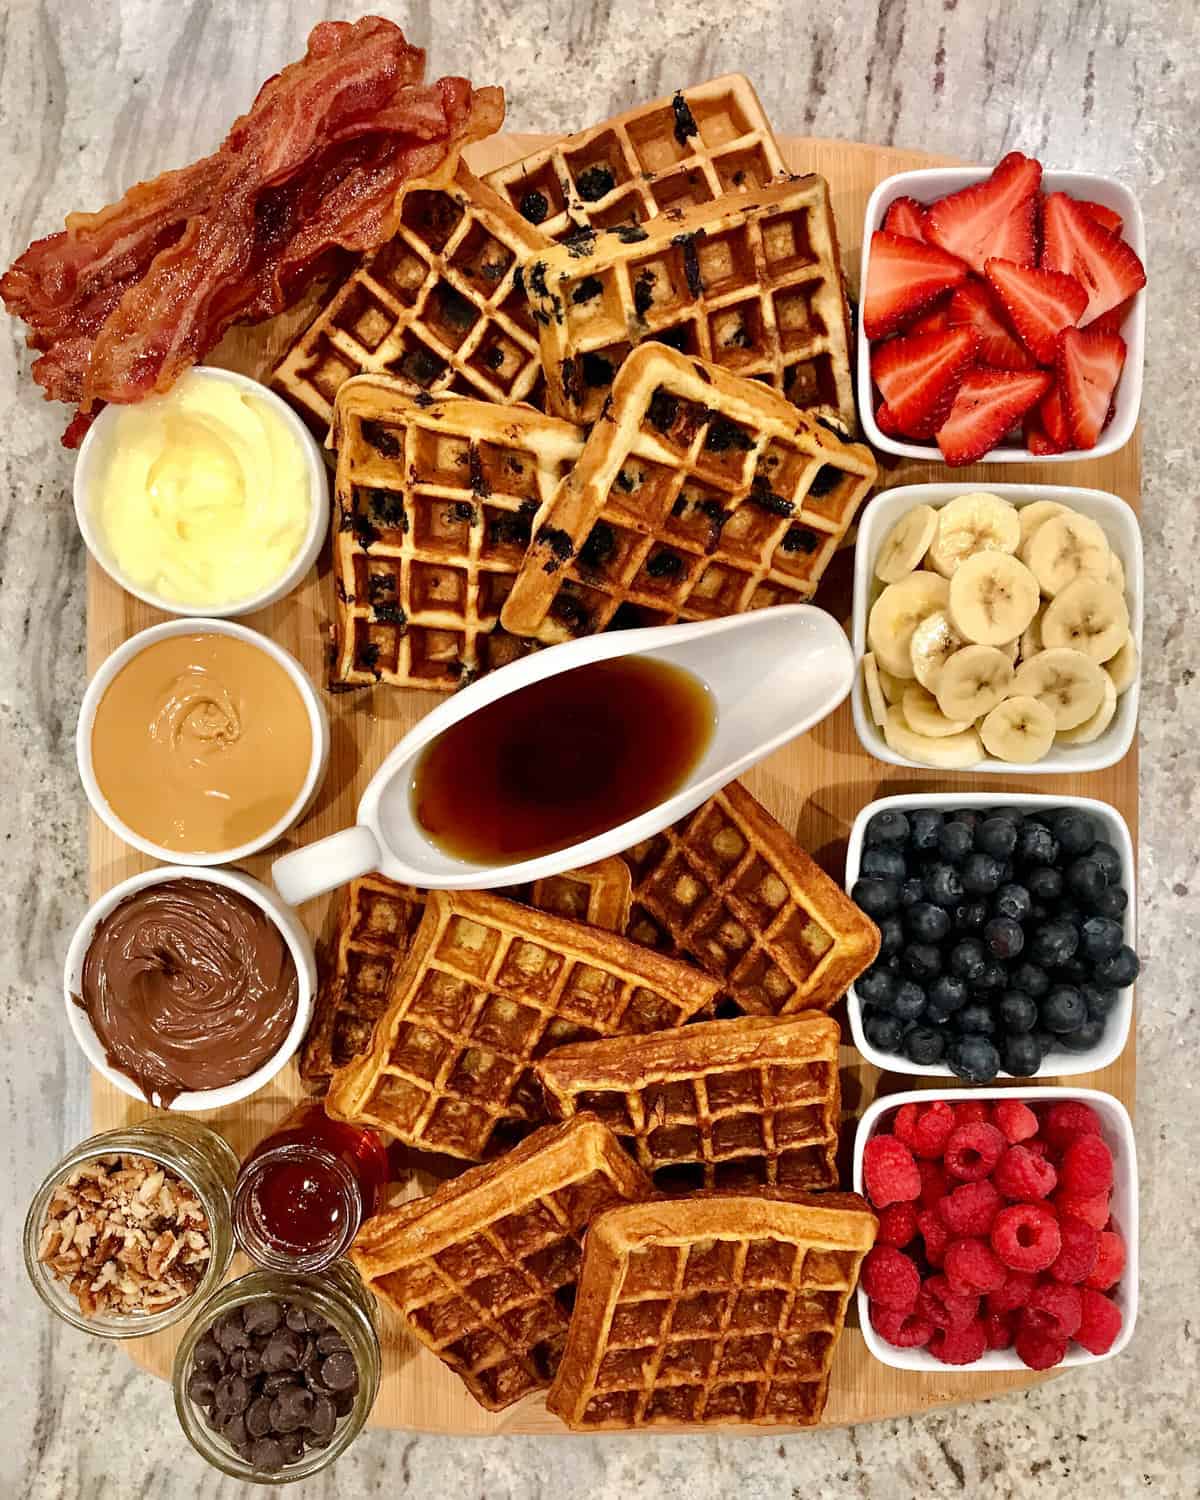 Build-Your-Own Waffle Board by The BakerMama